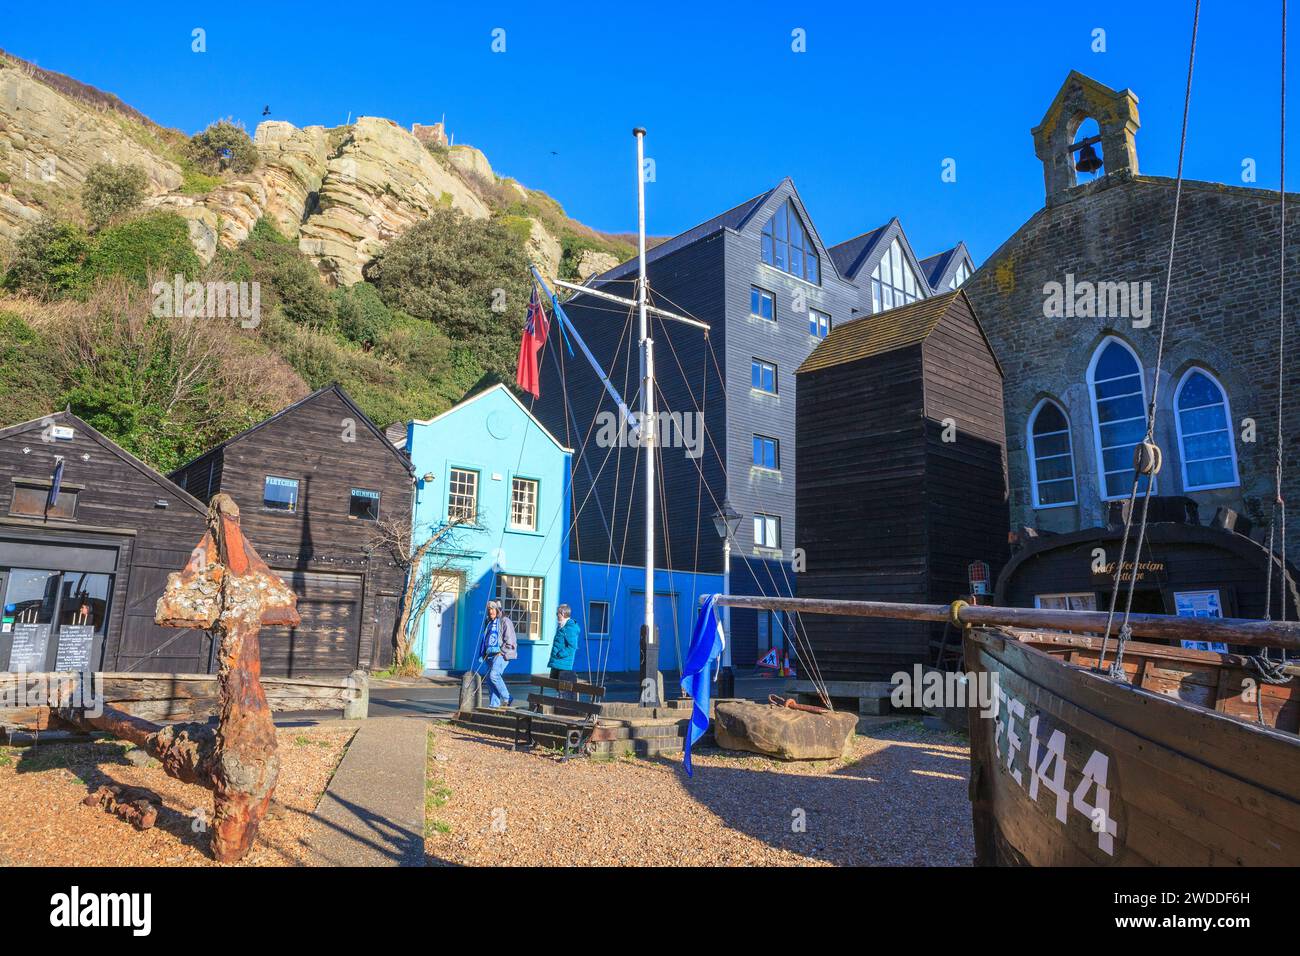 Hastings old town maritime museum quarter and fisherman's museum, Rock-a-Nore, East Sussex, UK Stock Photo